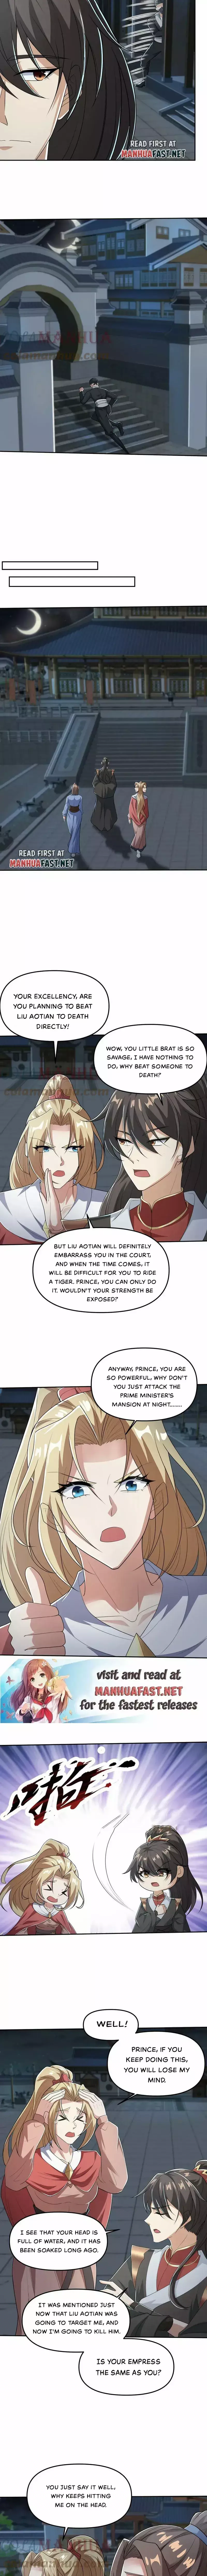 It's Over! Empress’ Husband Is Actually Invincible - 36 page 4-5c904327